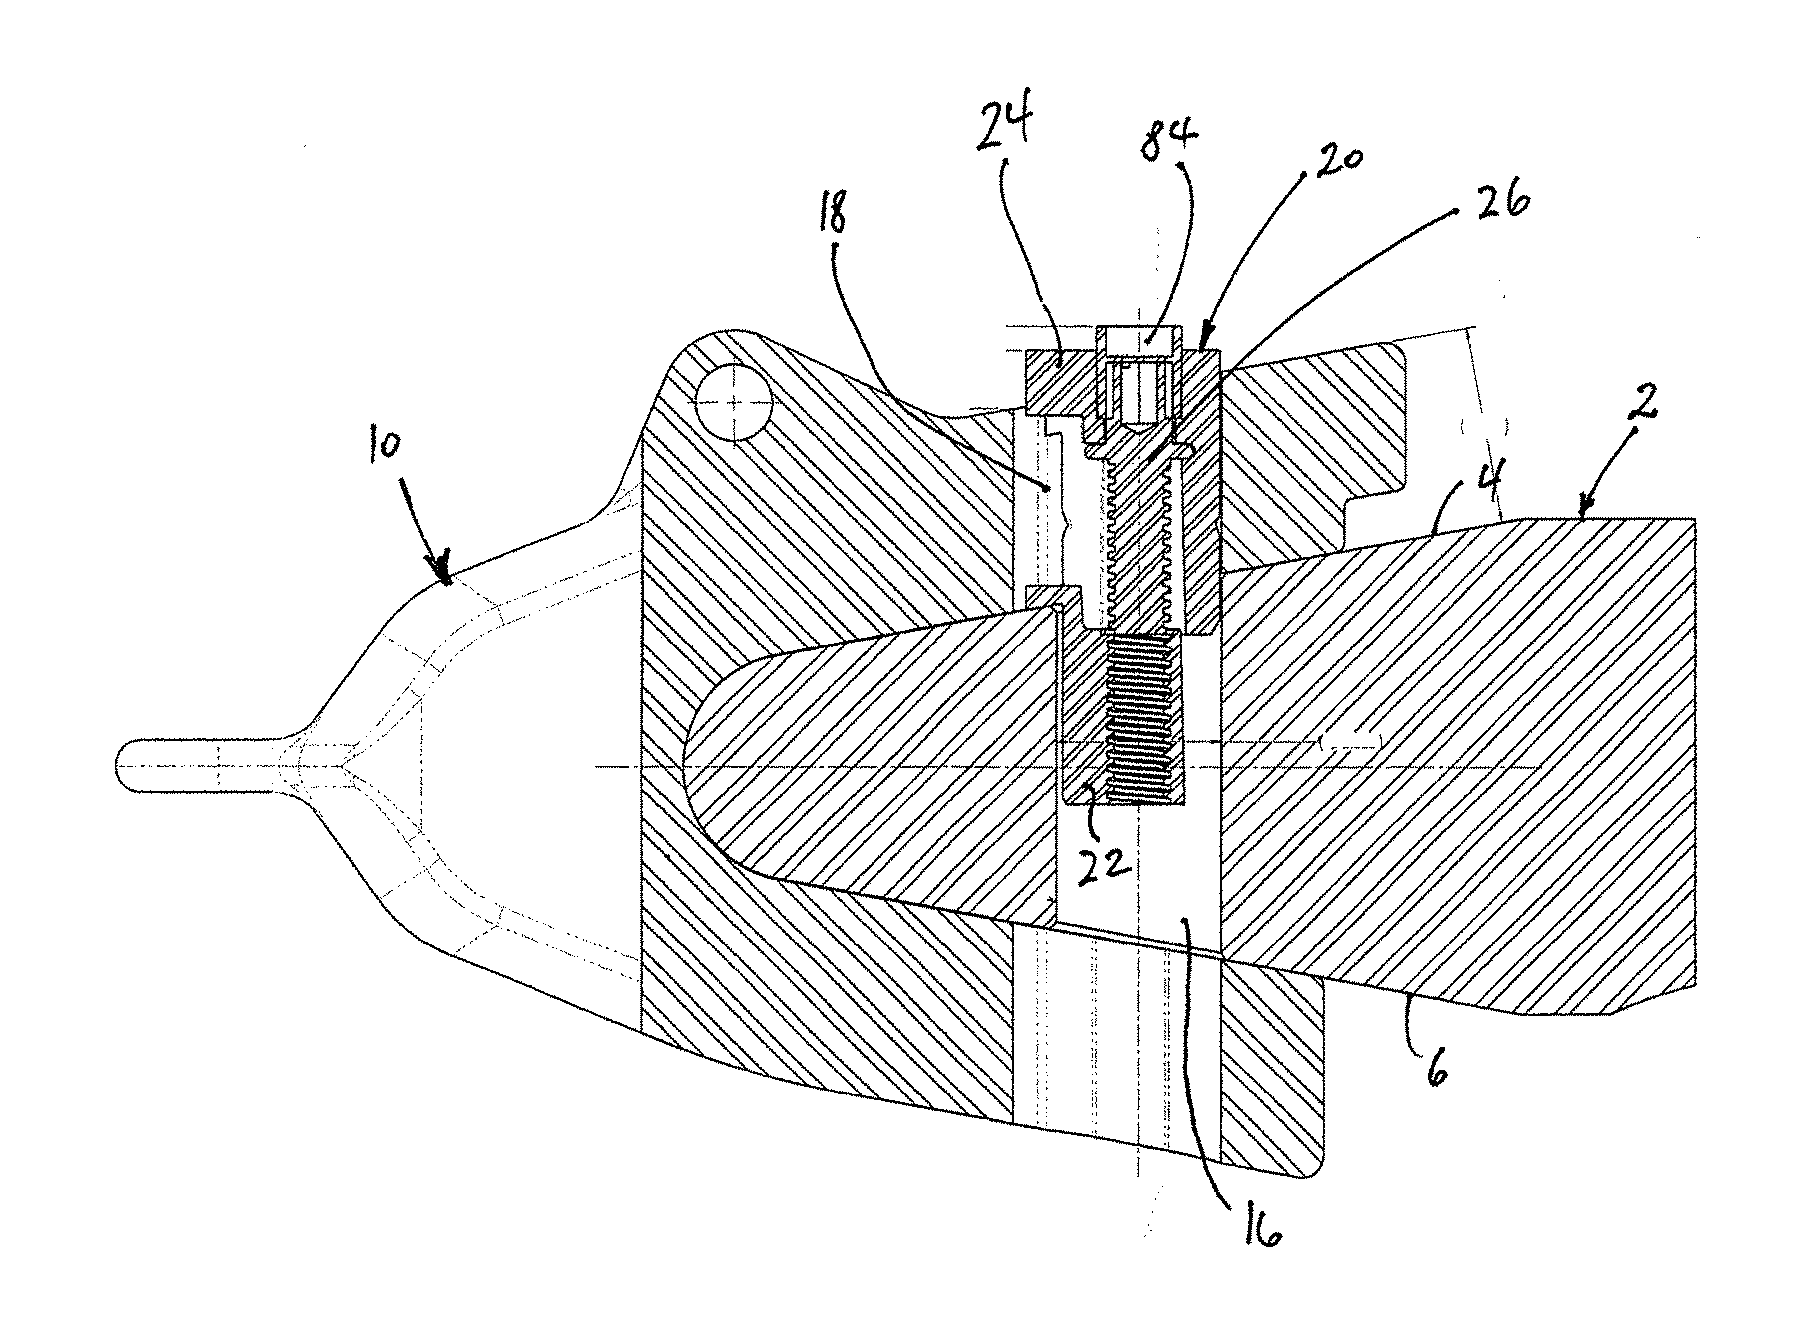 Self-locking connector pin for demountably securing consumable ground digging components to containers of earth moving equipment